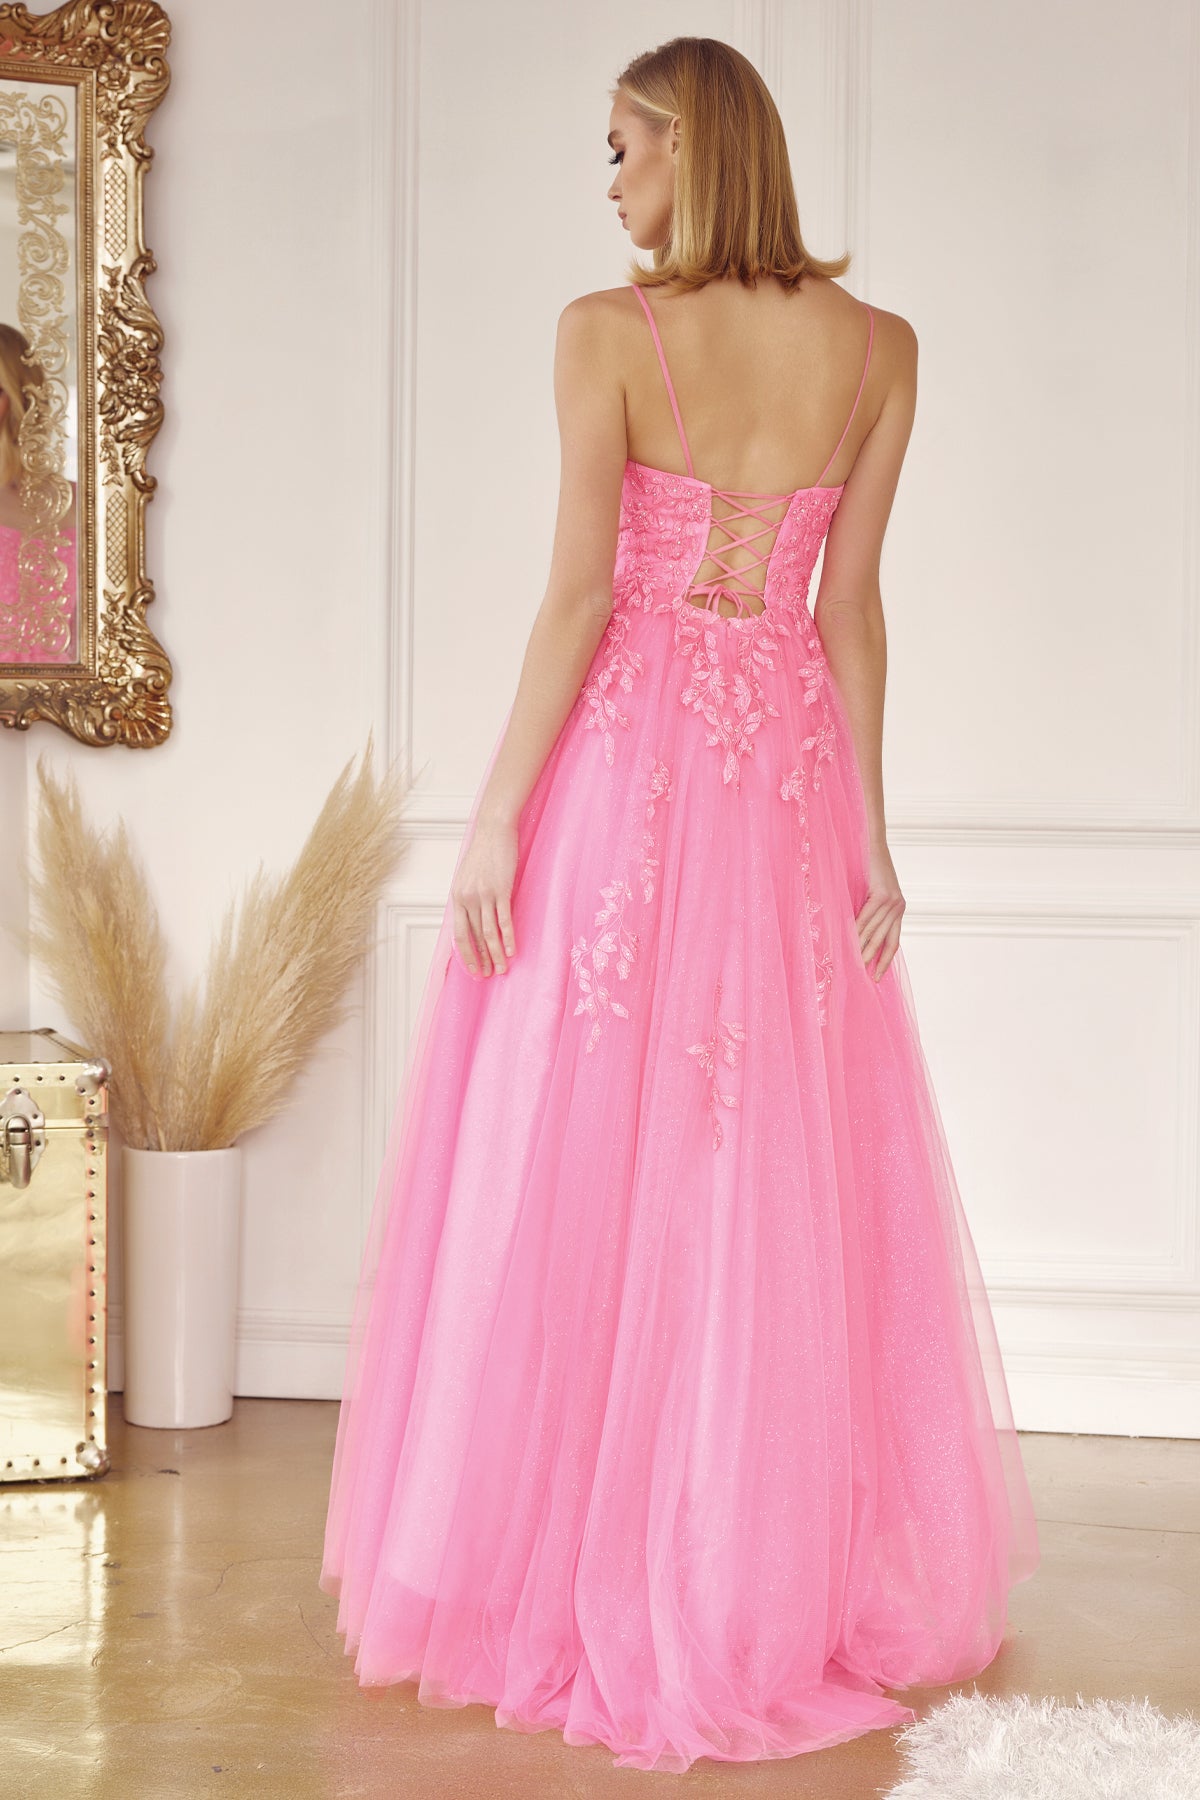 Floral Corset Tulle Prom Ball Gown